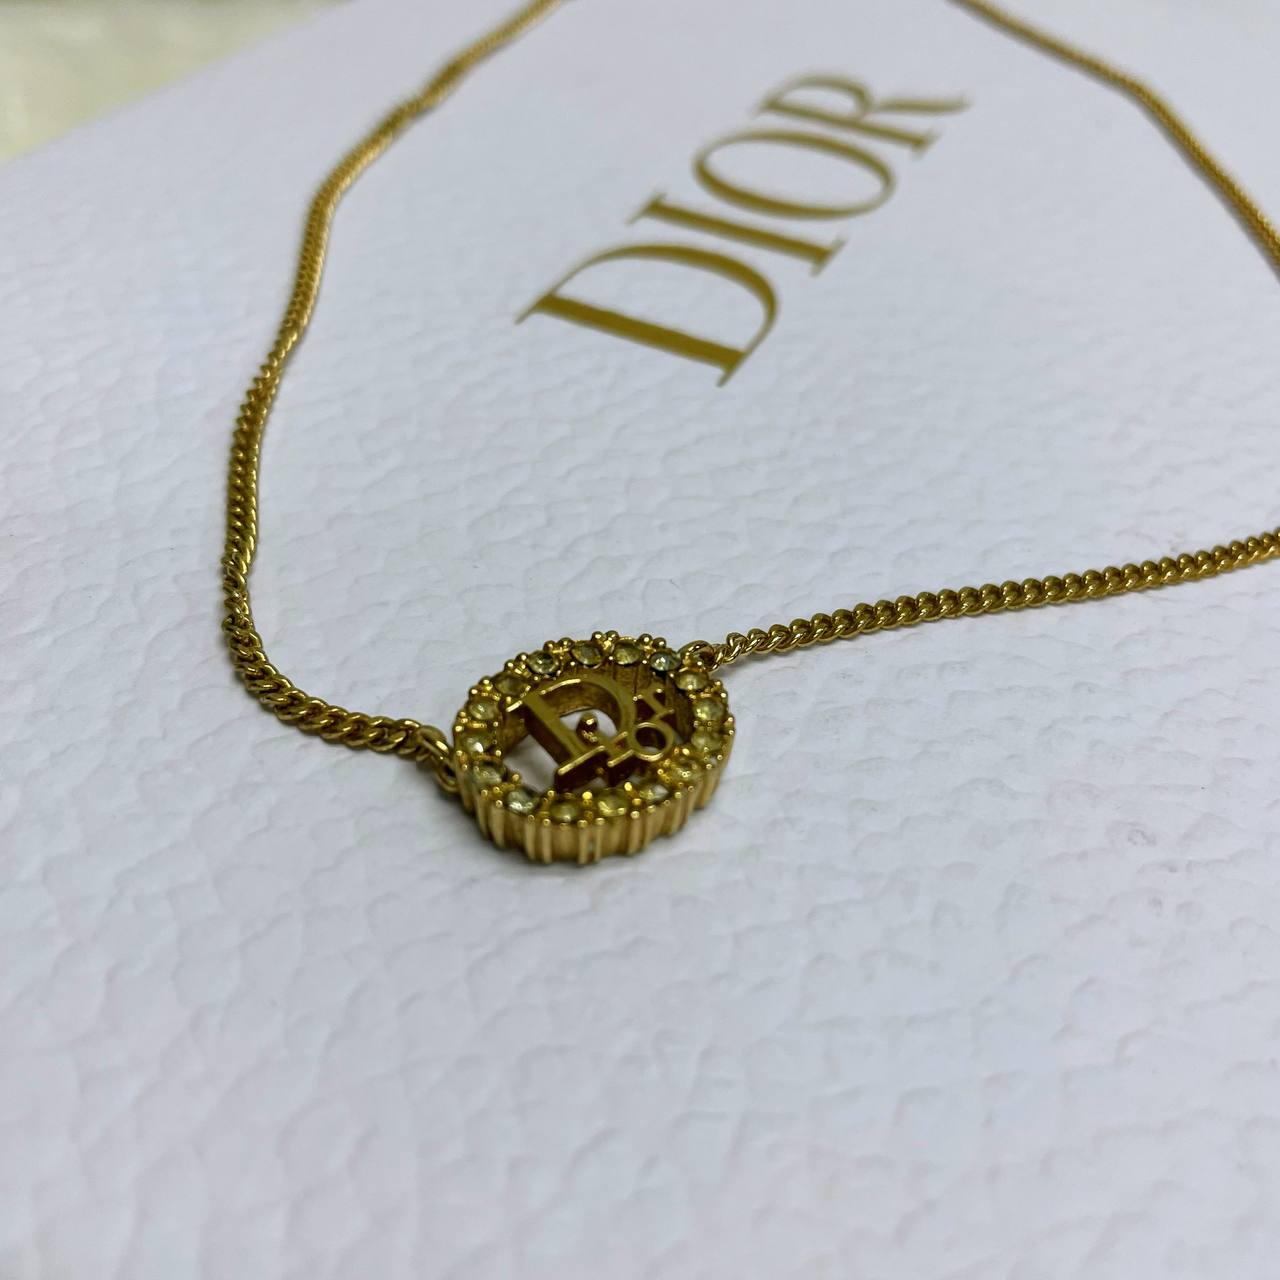 【 In-Stock 】Christian Dior Logo Vintage Necklace 水鑽頸鏈